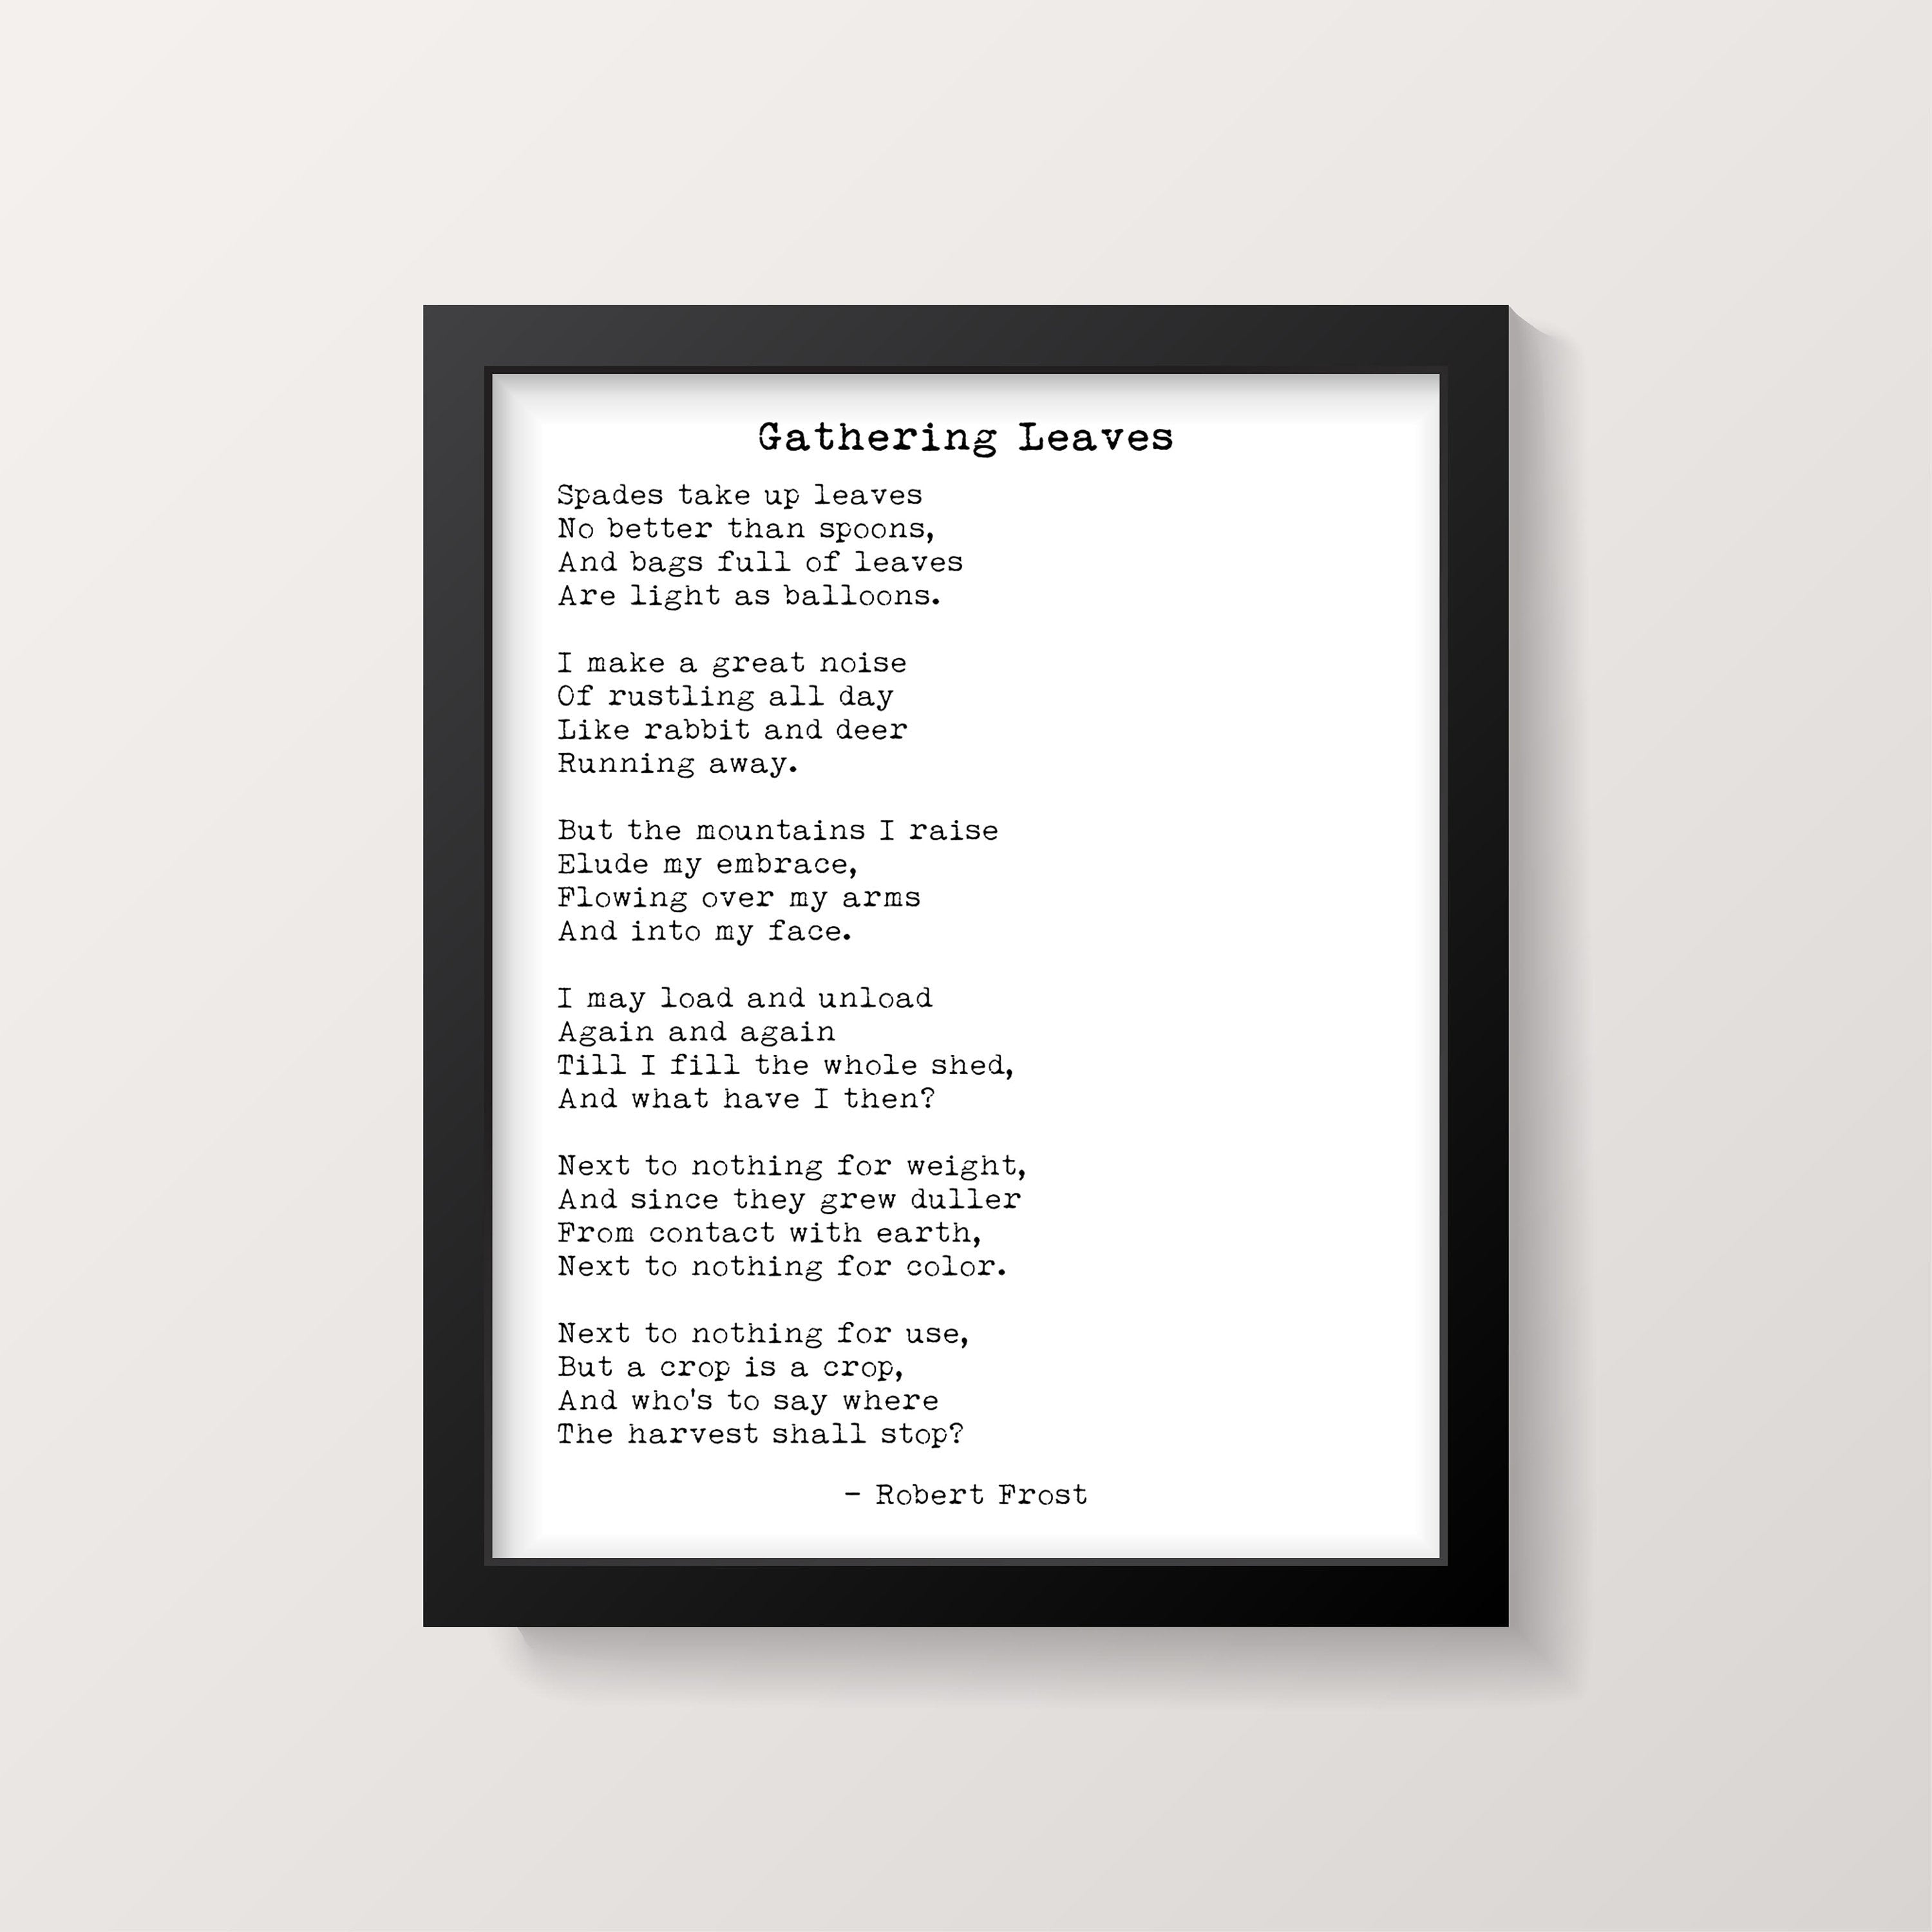 Robert Frost Poem Gathering Leaves Print, Spades take up leaves No better than spoons